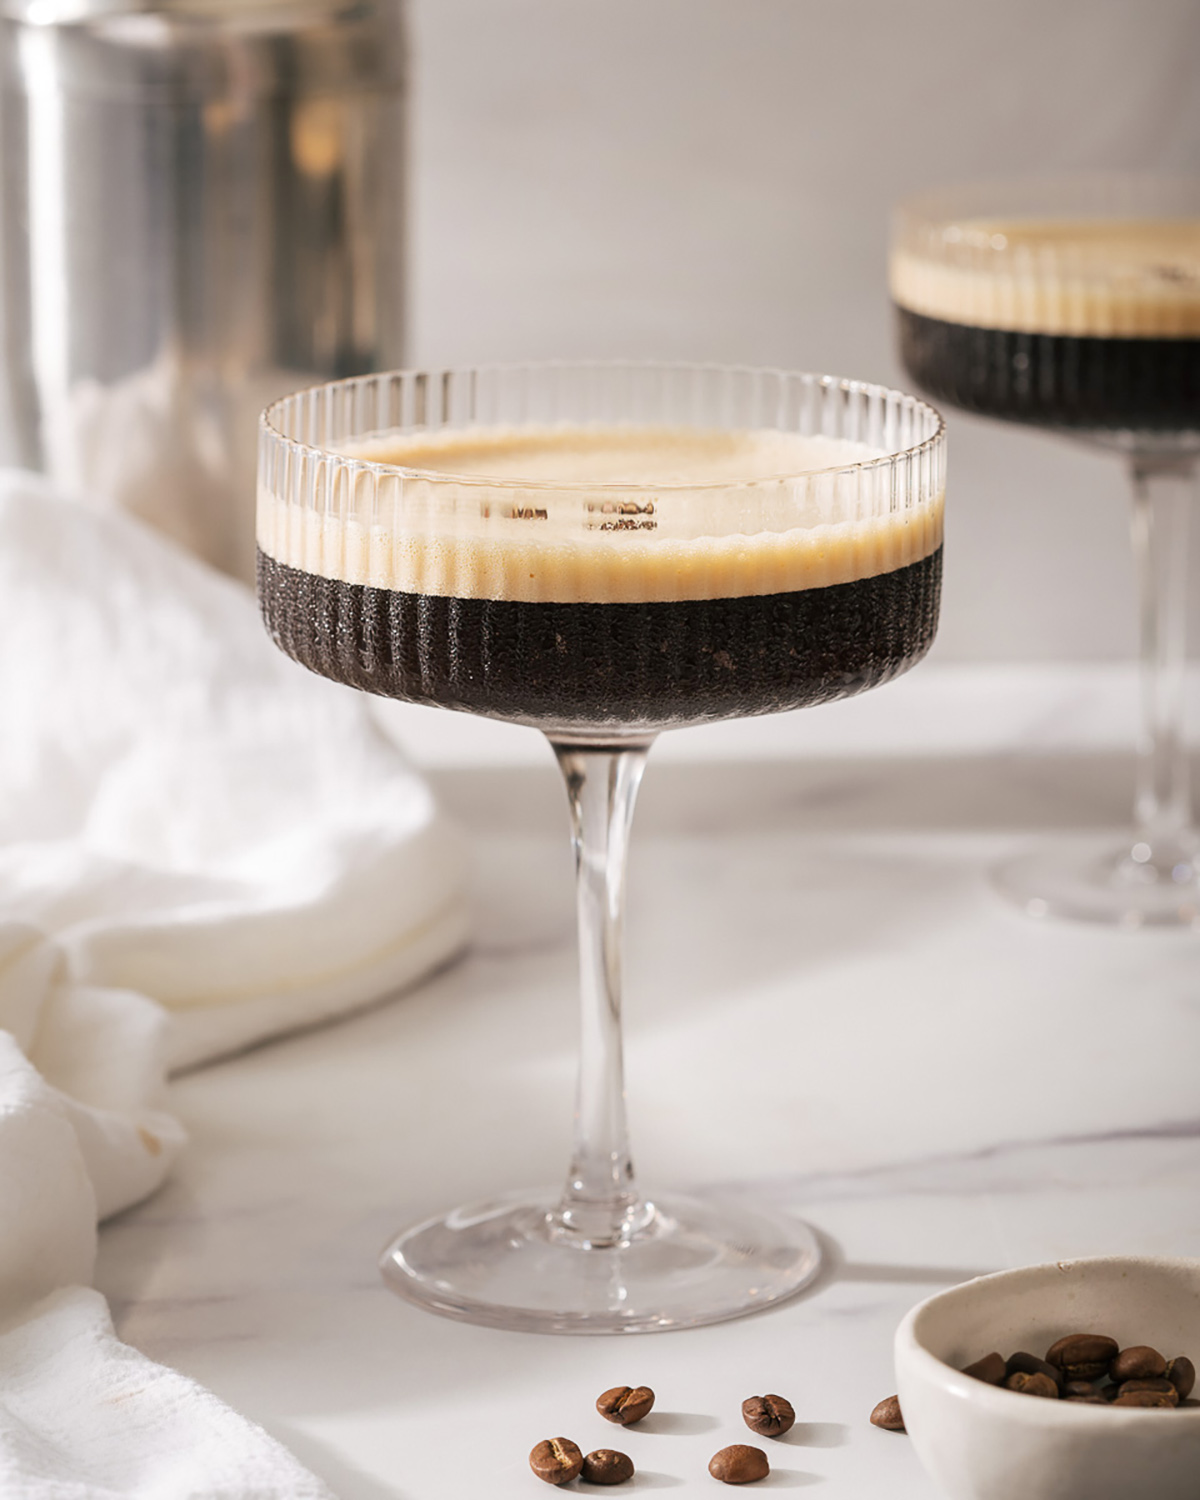 A martini glass with an espresso martini on a counter with another glass and shaker nearby